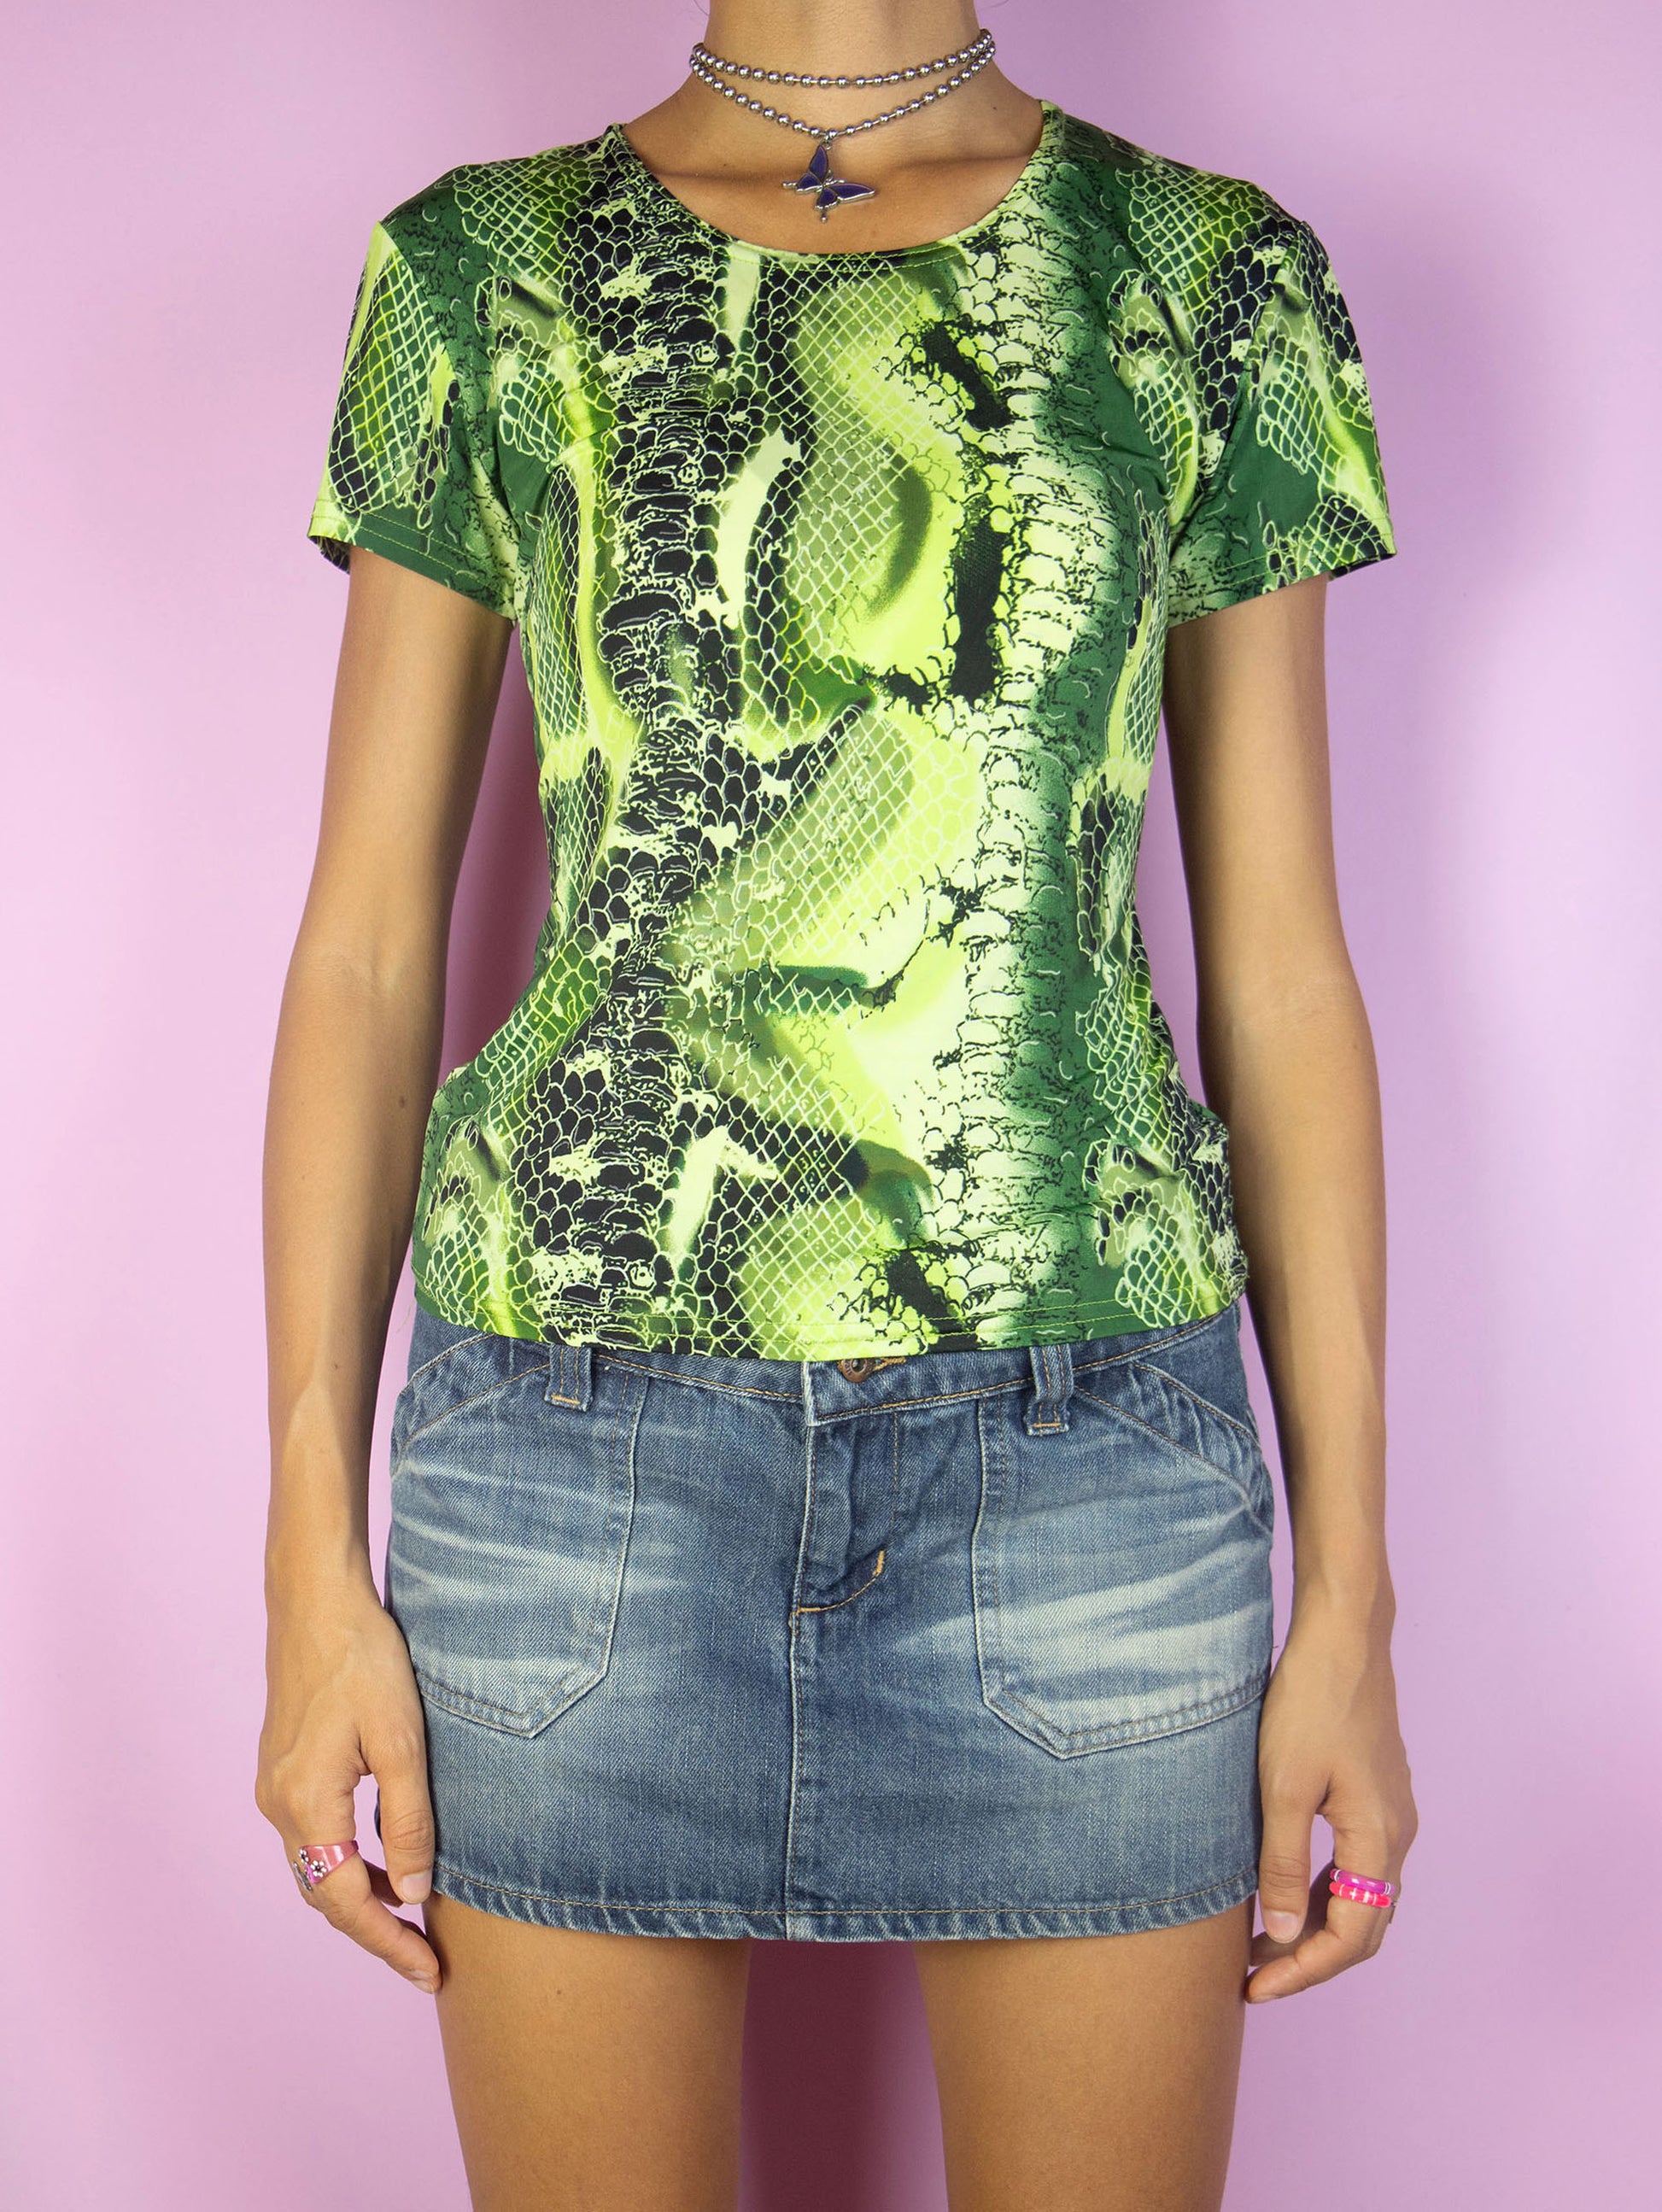 The Vintage 90s Green Snake Print Top is a short-sleeved green and black animal print graphic shirt. Cyber goth 1990s festival rave party top.